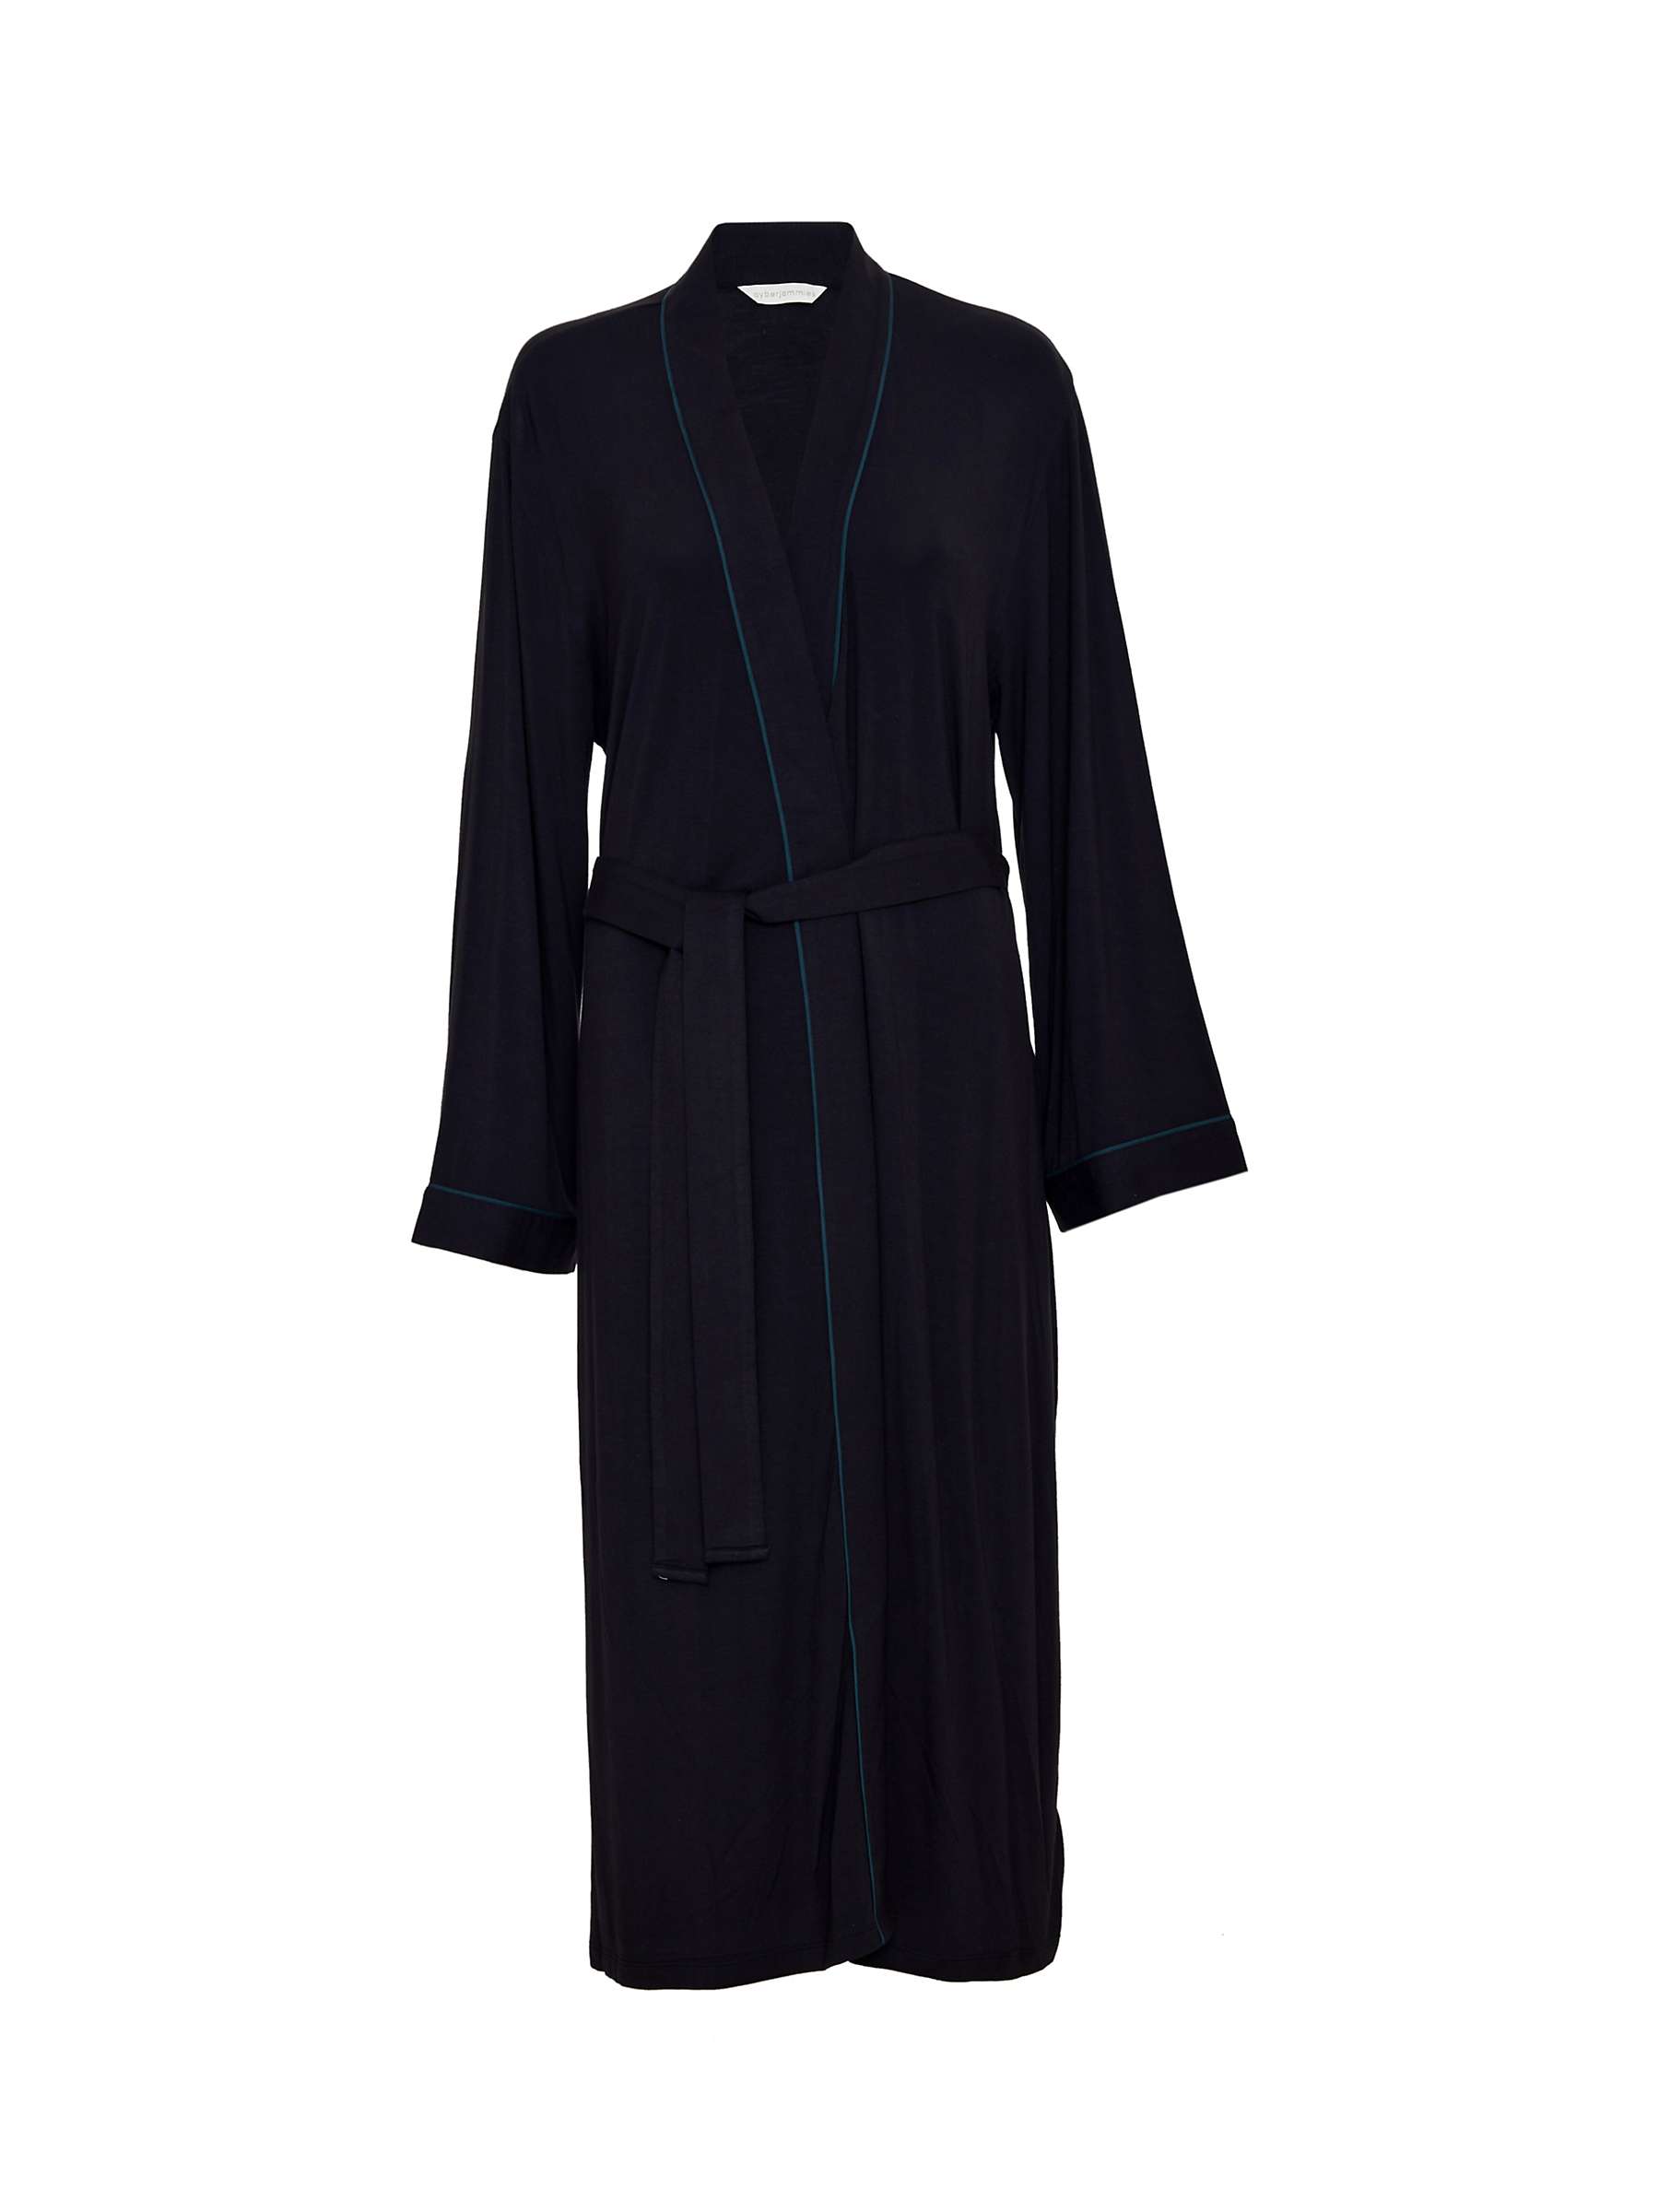 Buy Cyberjammies Avery Piped Jersey Dressing Gown Online at johnlewis.com